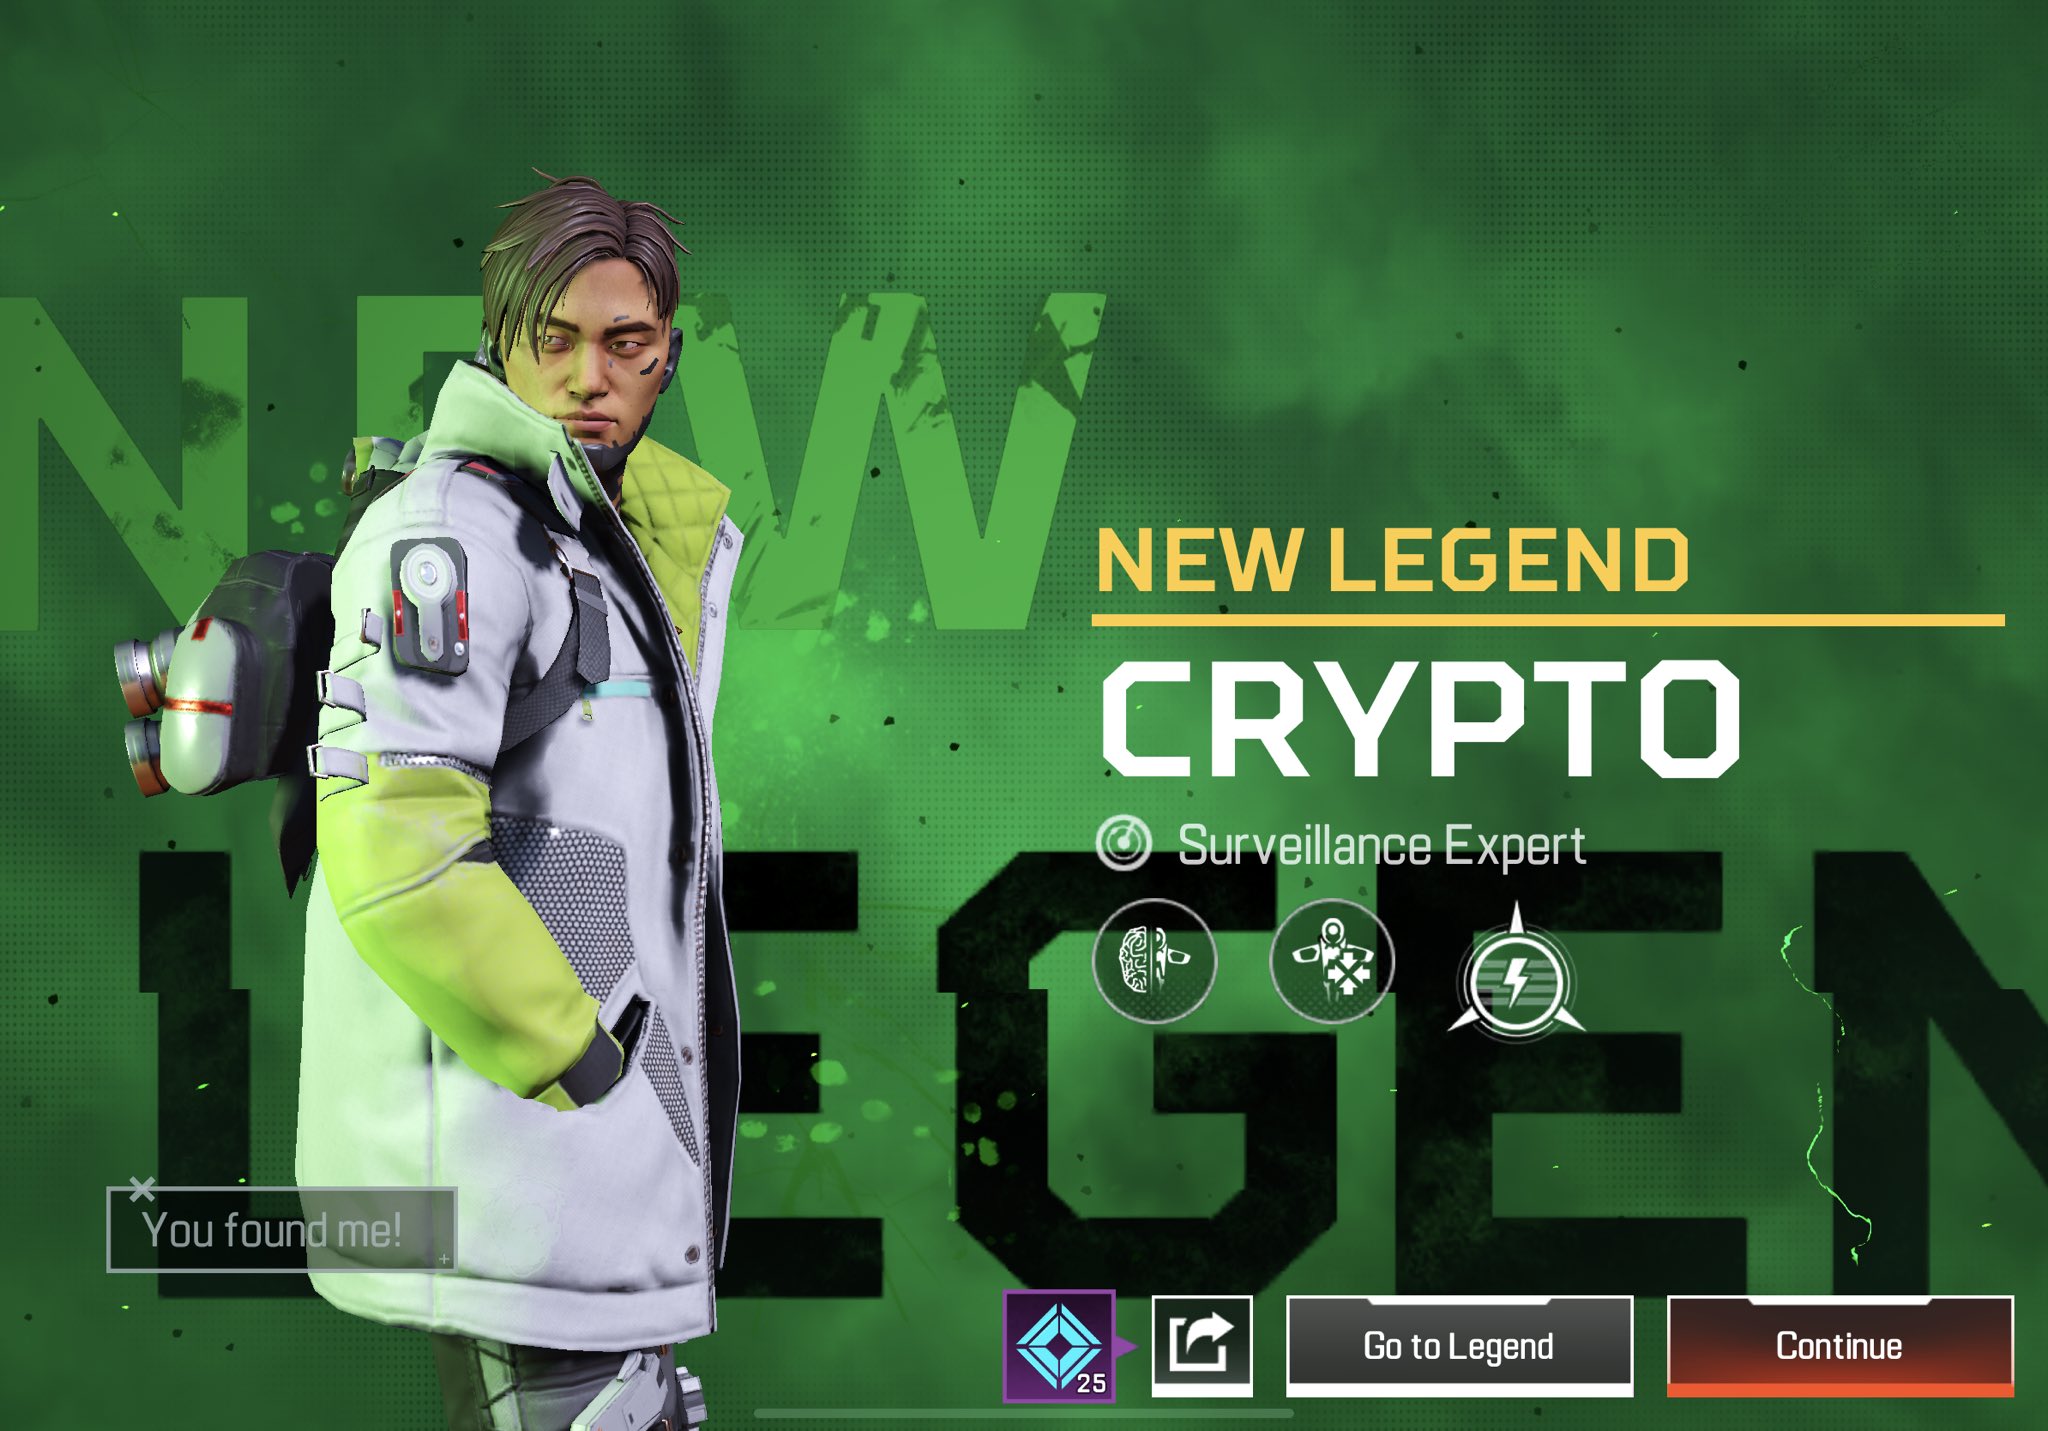 Bug Reveals Crypto As Newest Legend Coming to Apex Legends Mobile